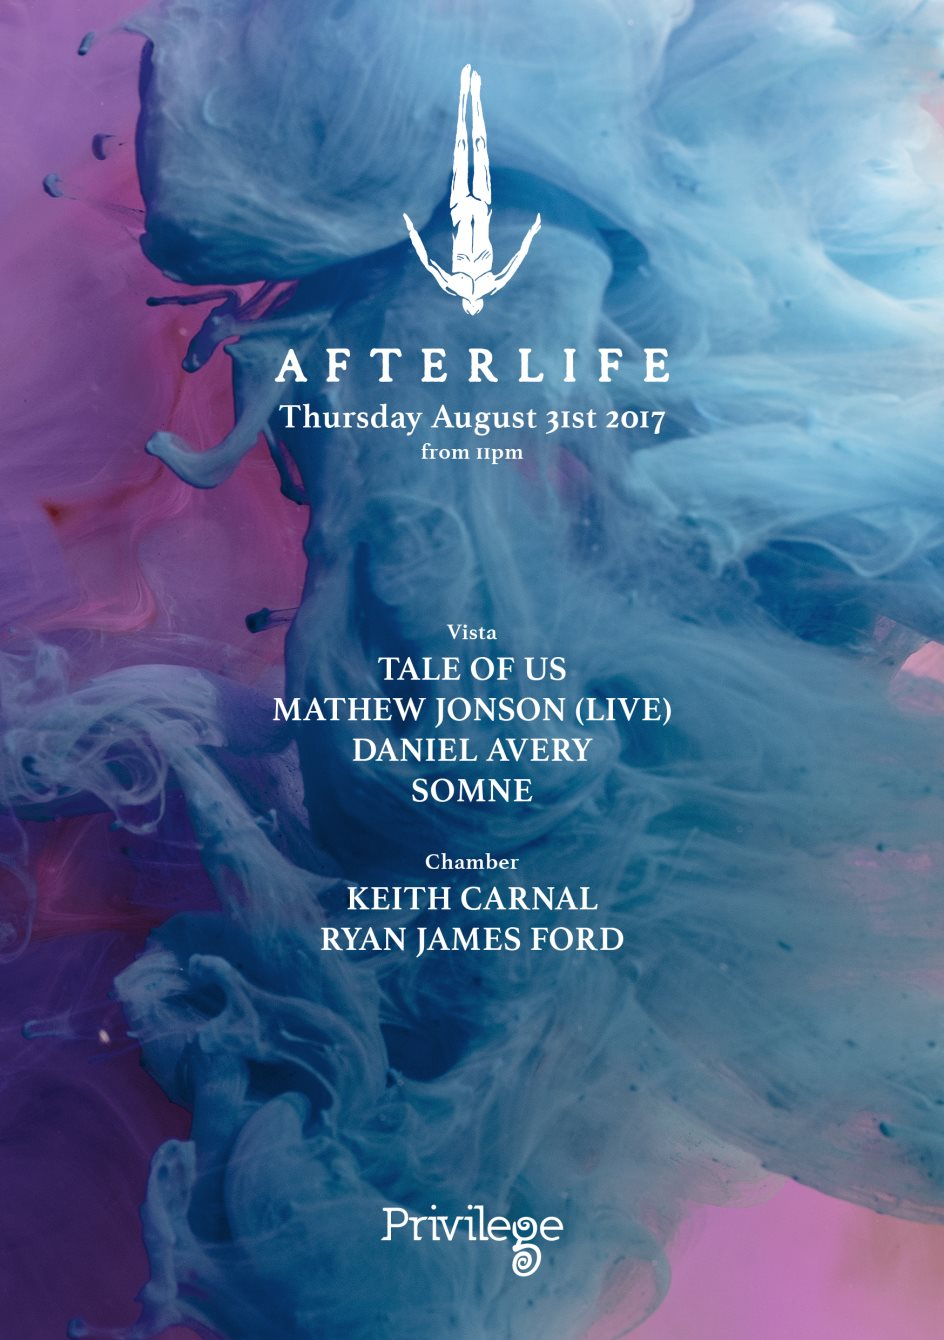 Afterlife with Tale of Us: Zamna Music's first confirmation